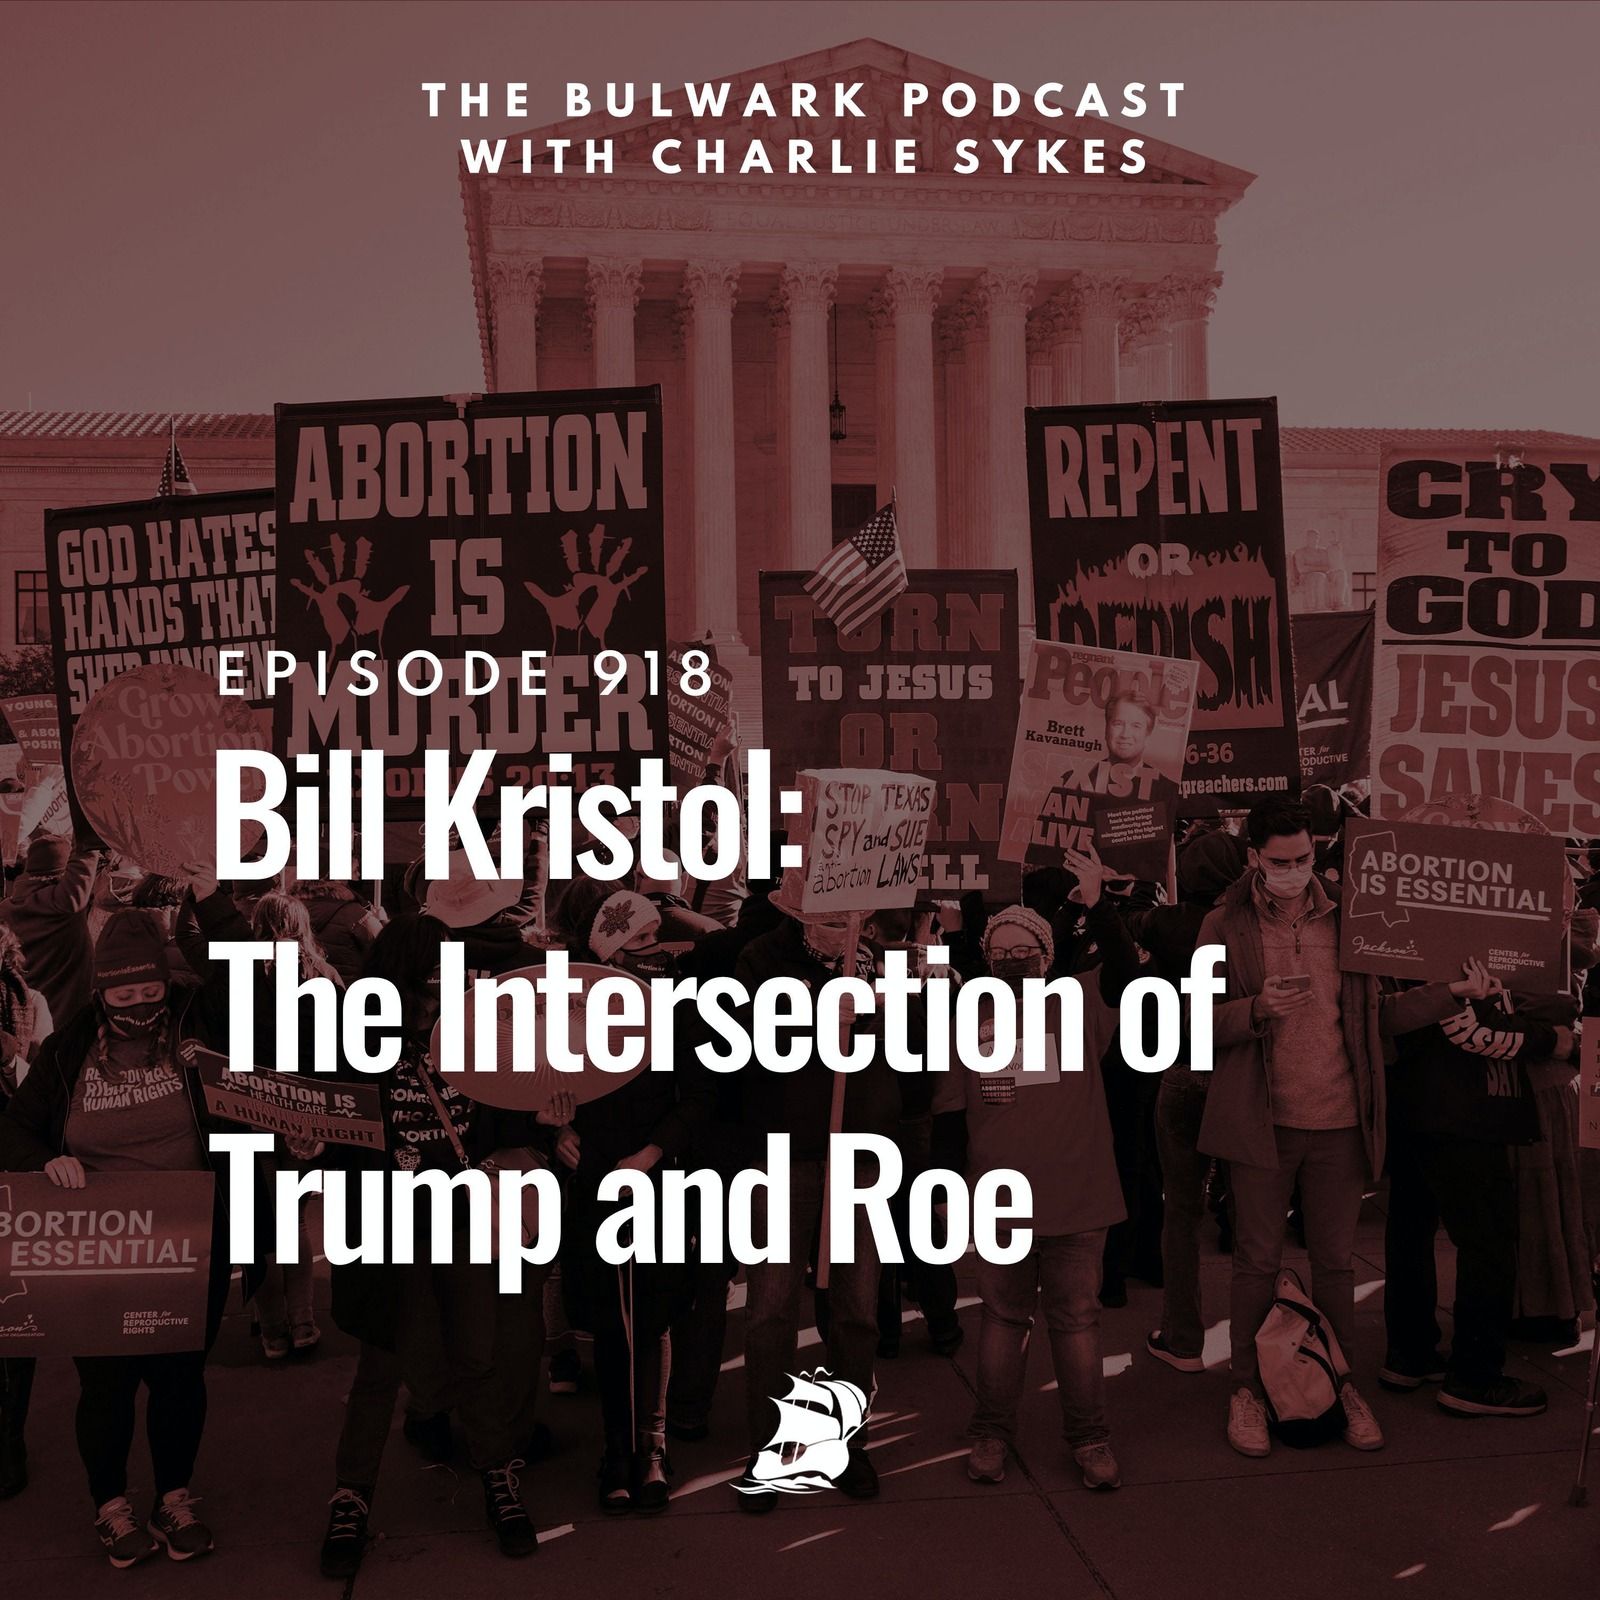 Bill Kristol: The Intersection of Trump and Roe by The Bulwark Podcast